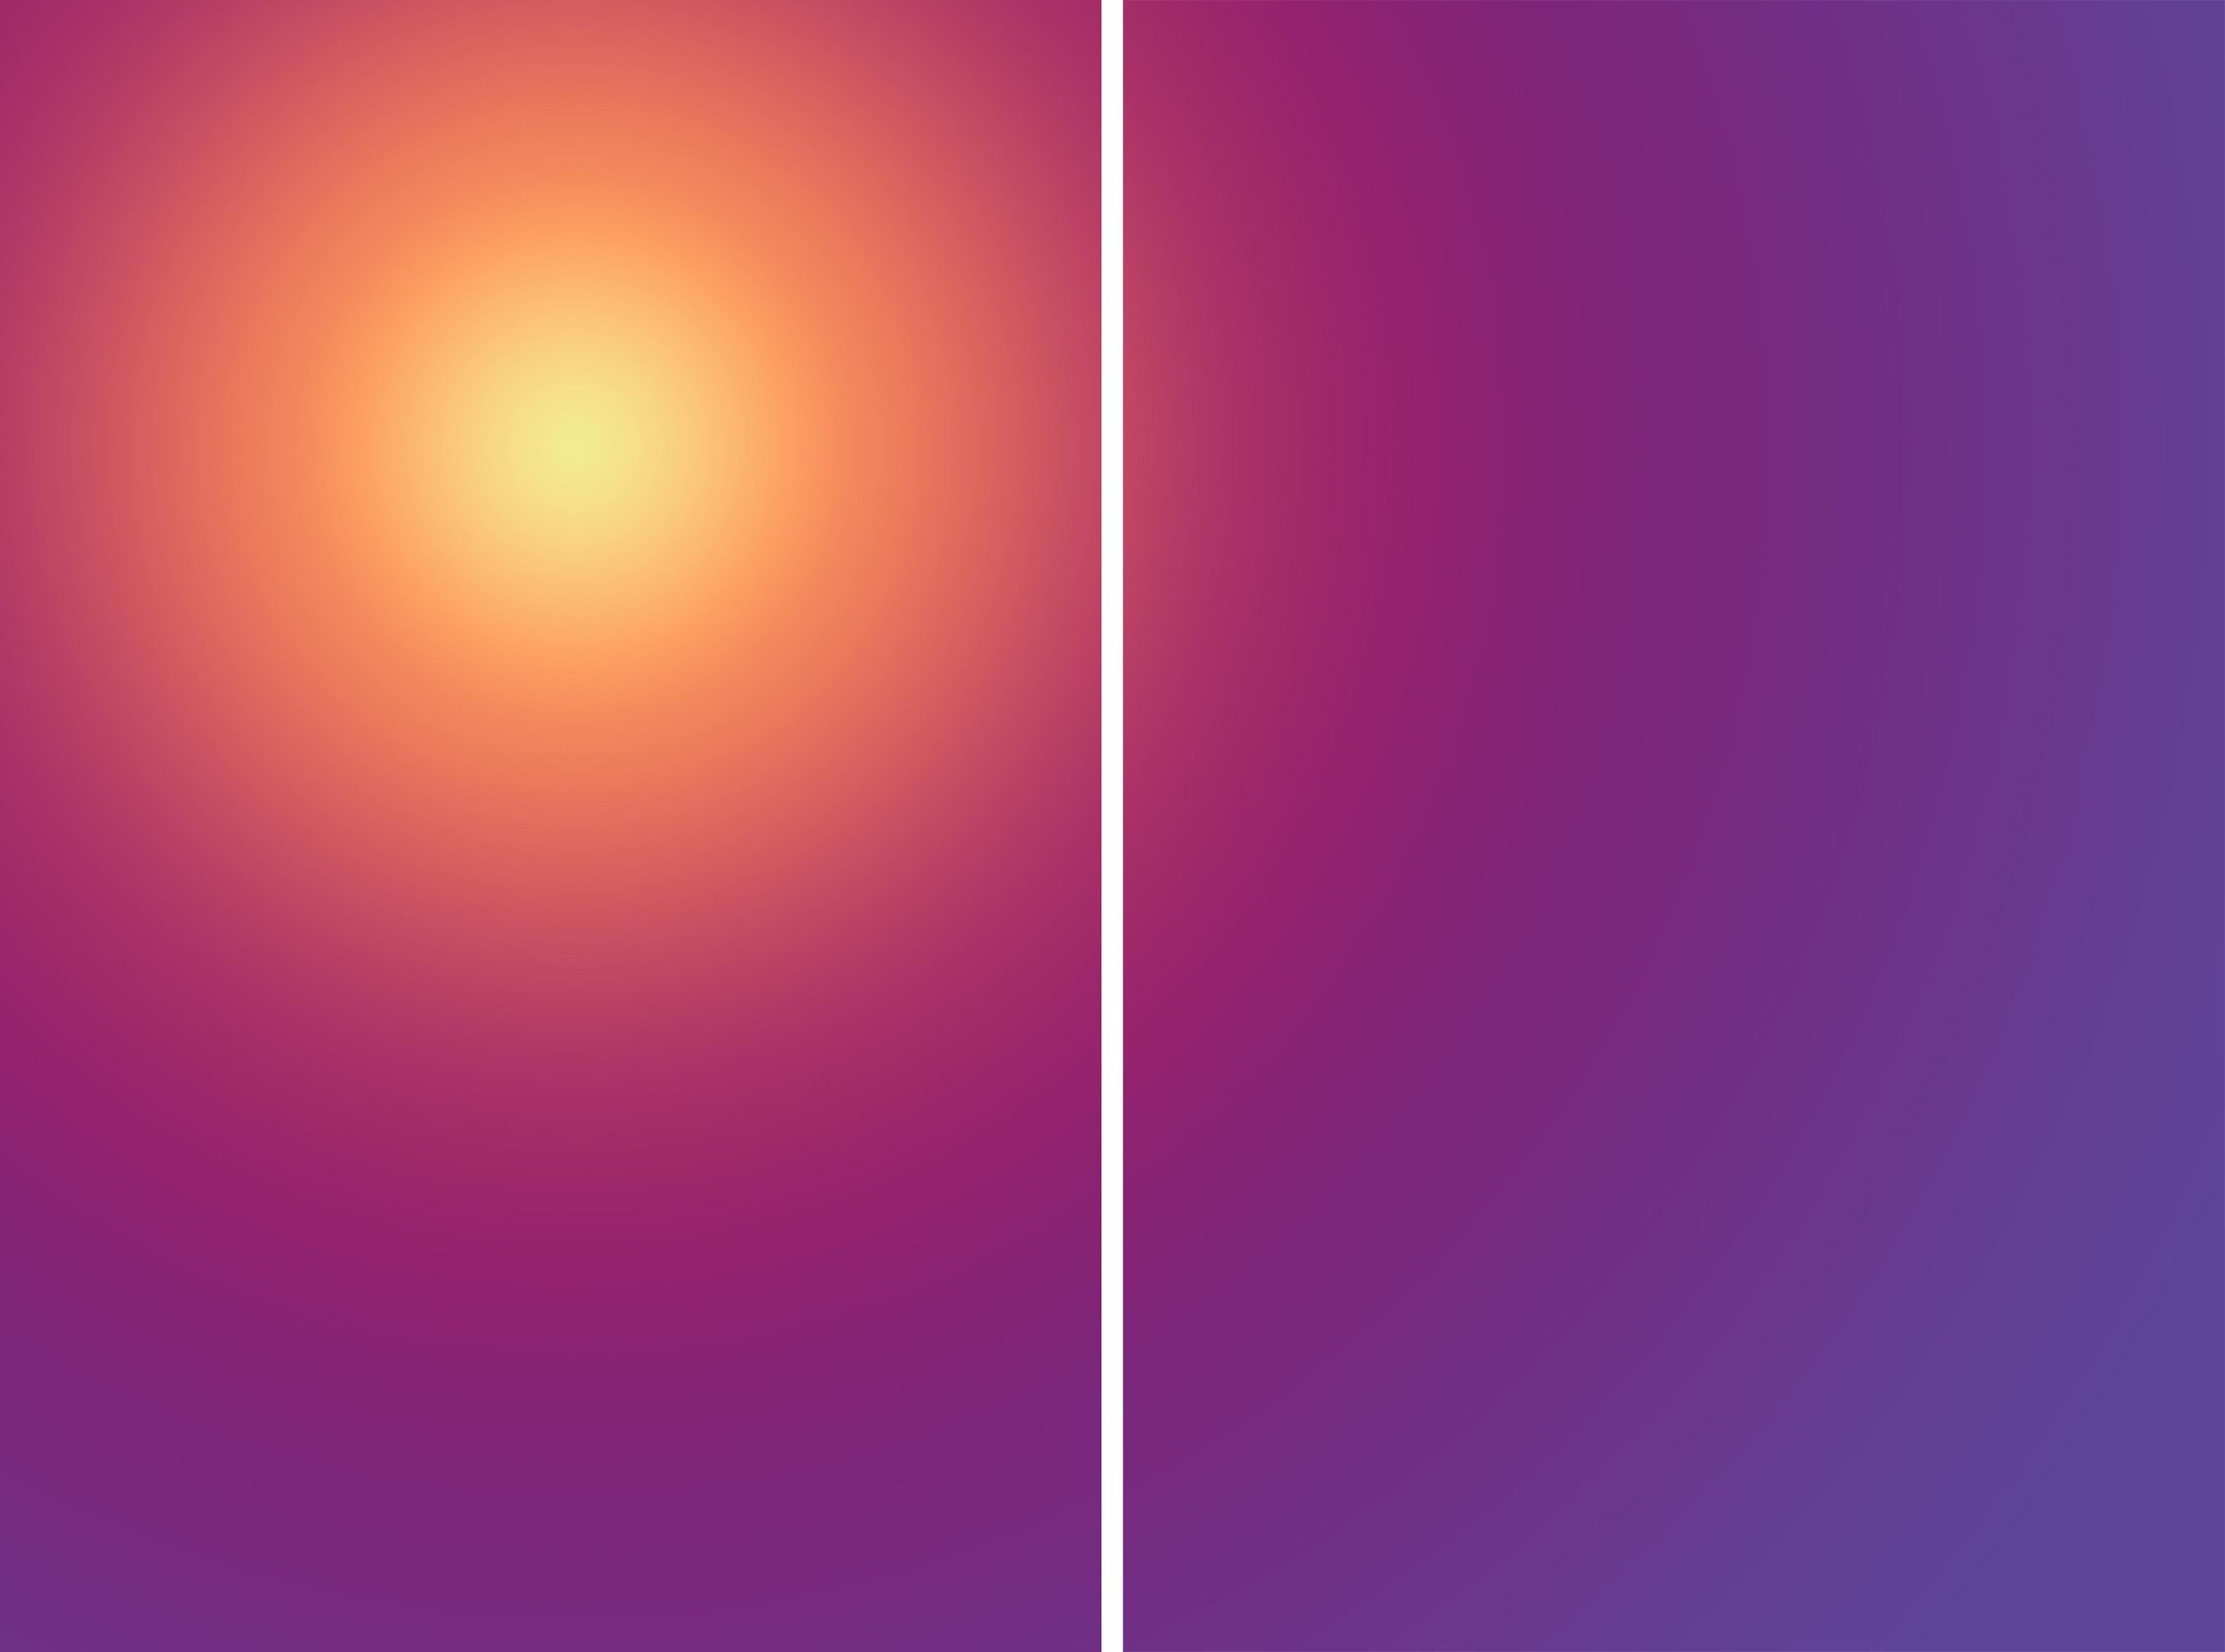 Sun I, Abstract Diptych, Giclée Print, Hue Transitions Yellow to Purple Gradient